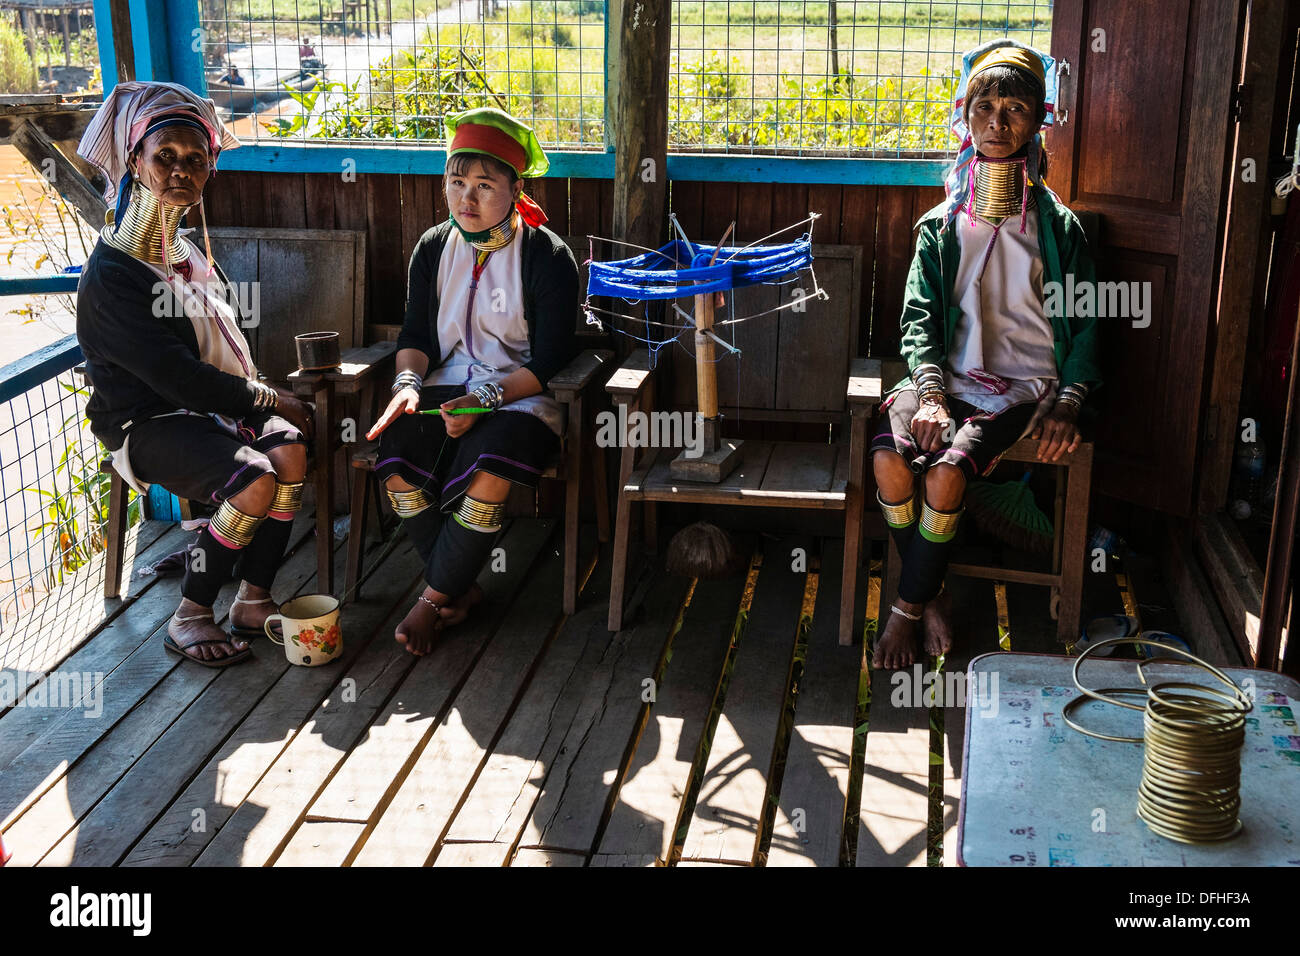 So-called Giraffe Women as tourist attraction in village at Inle Lake, Myanmar, Asia Stock Photo